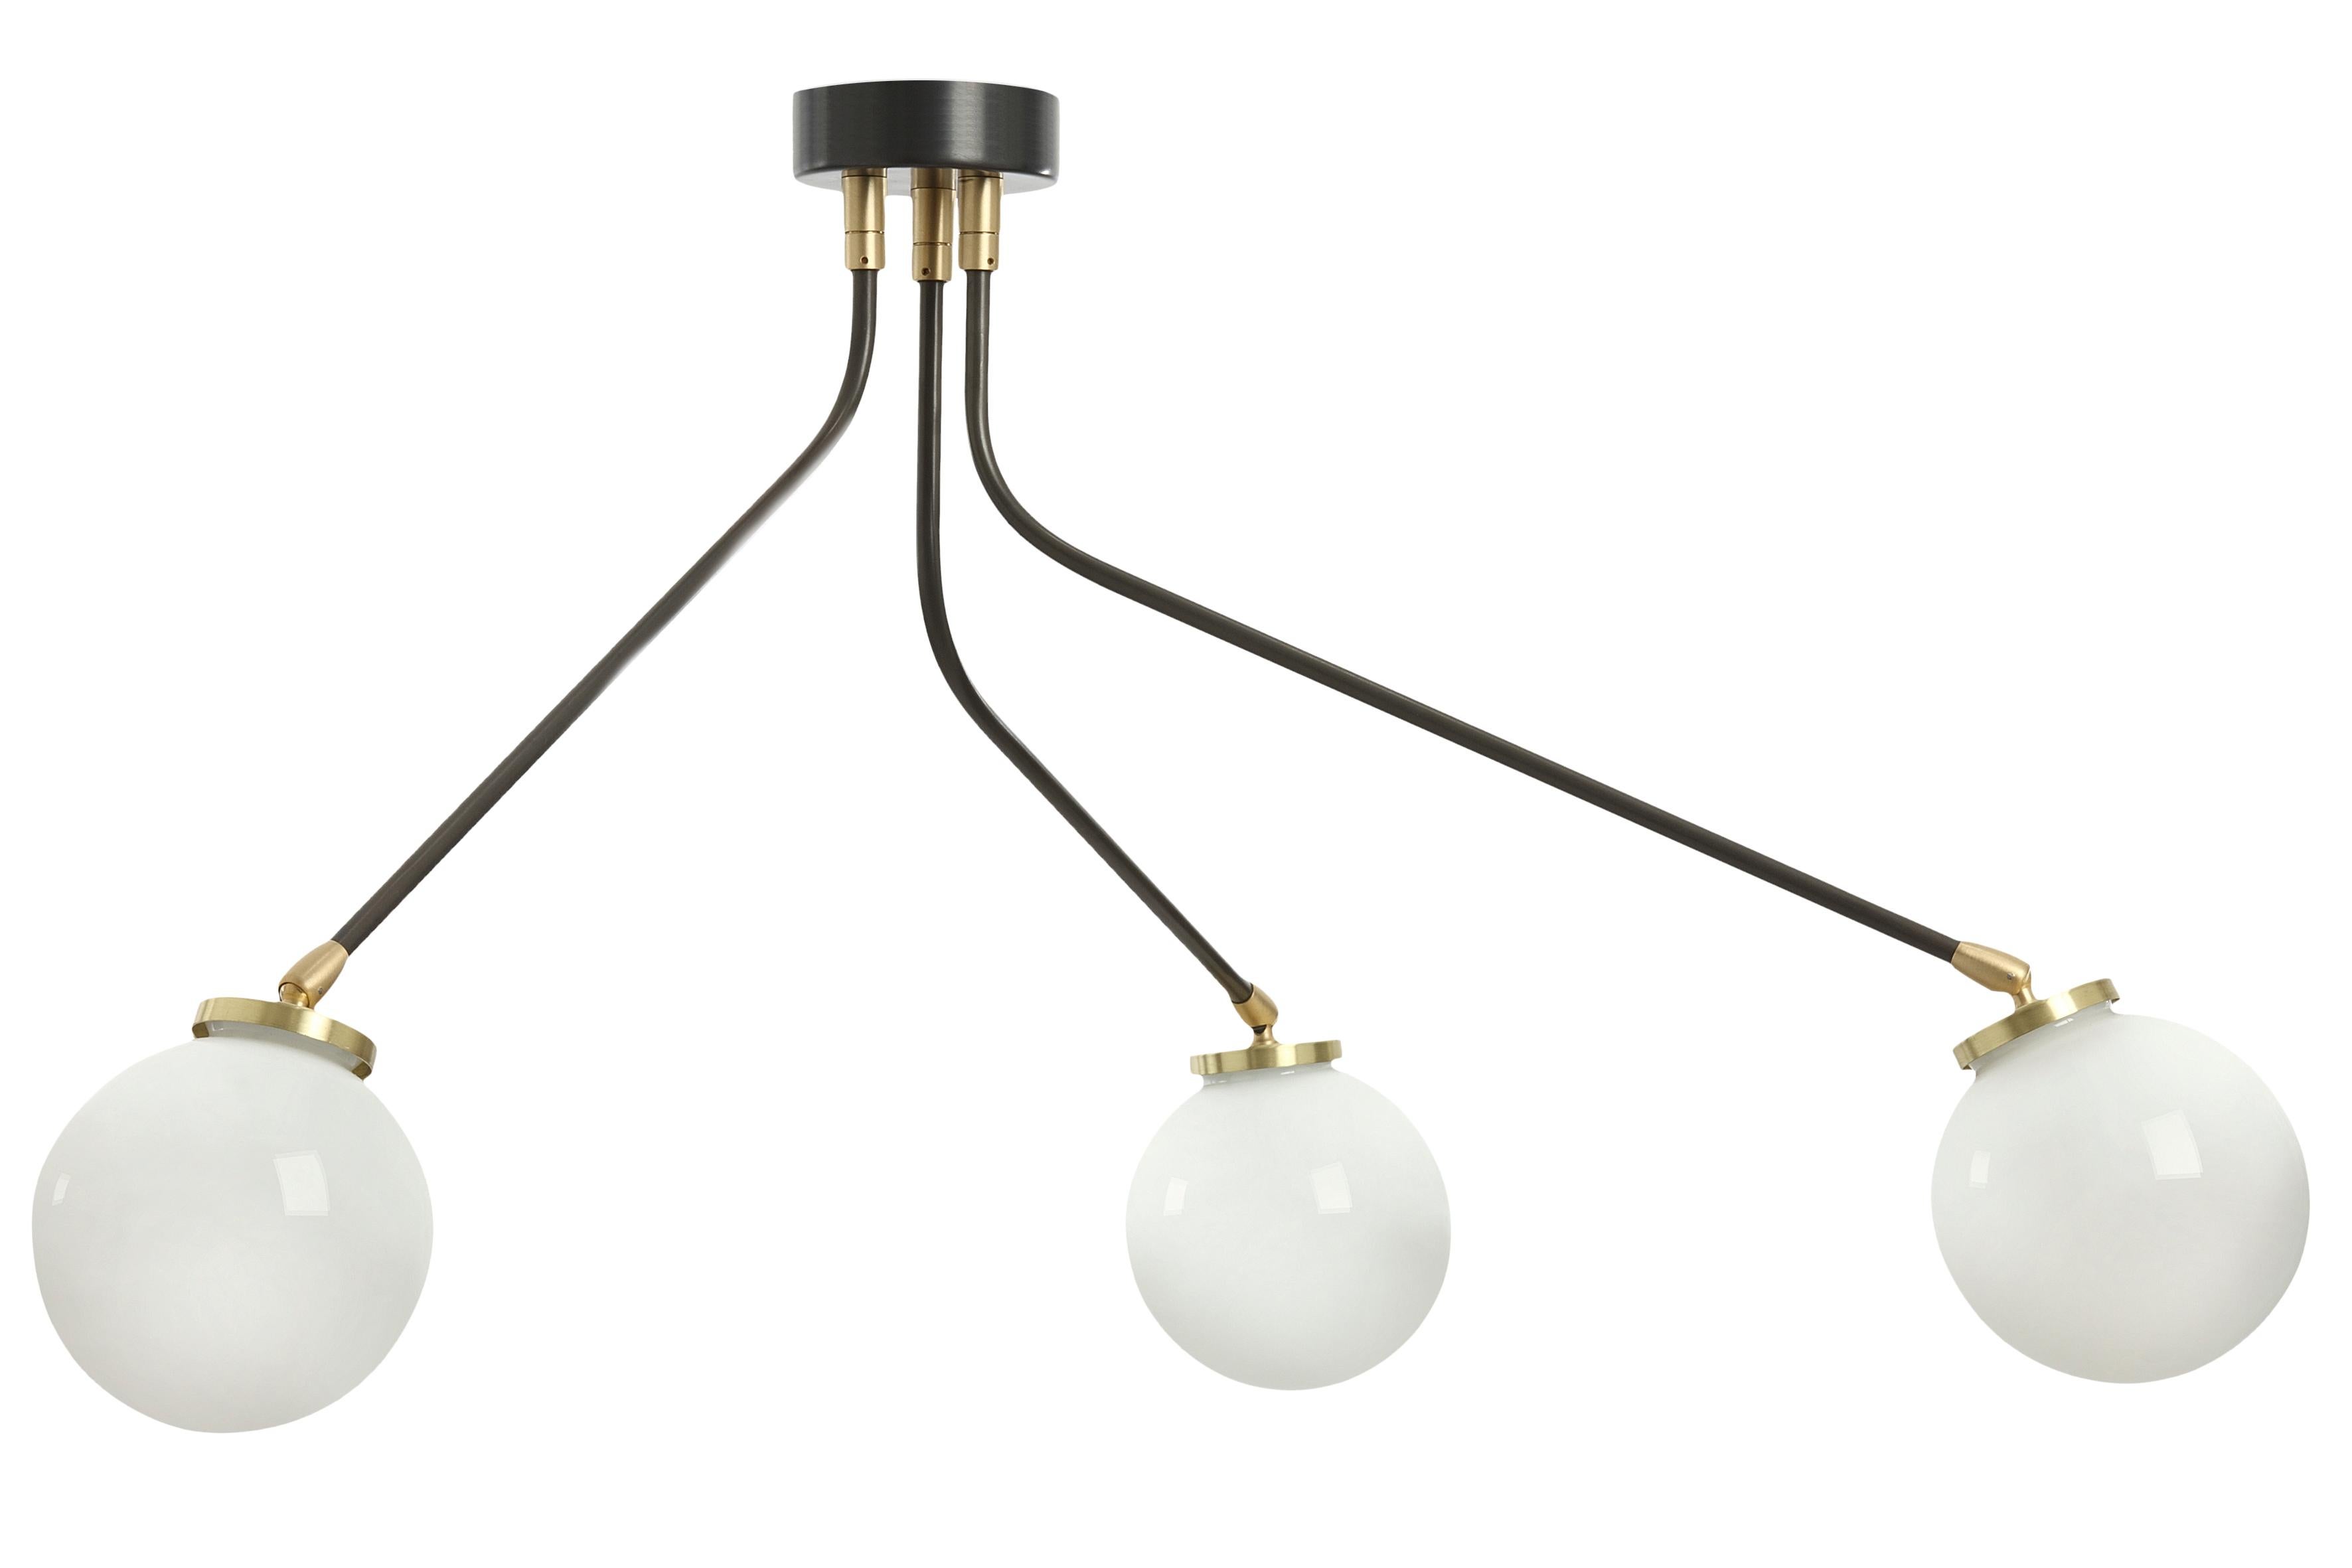 Array mini opal pendant light by CTO Lighting
Materials: bronze with satin brass details and opal glass shades
Dimensions: H 42.5 x W 75 cm

All our lamps can be wired according to each country. If sold to the USA it will be wired for the USA